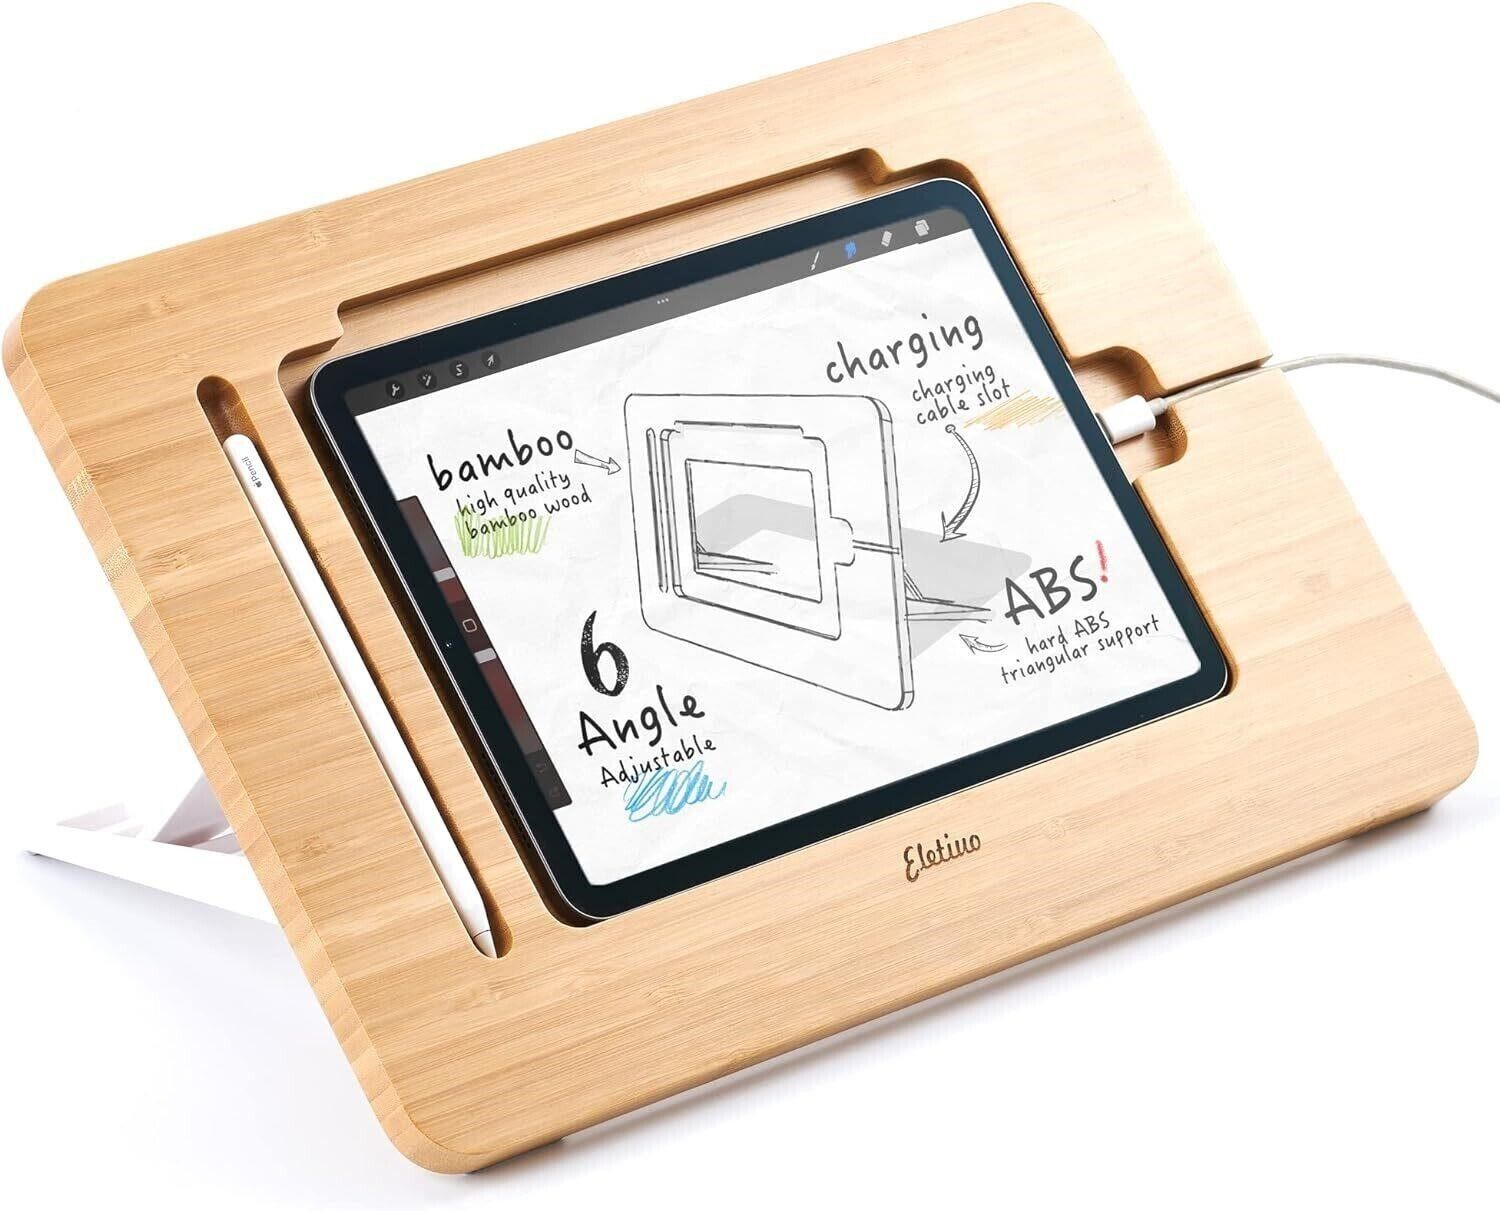 ELETIUO Adjustable Tablet Stand-Bamboo, 9.7-11 inch Tablets, Drawing, 6 Angle